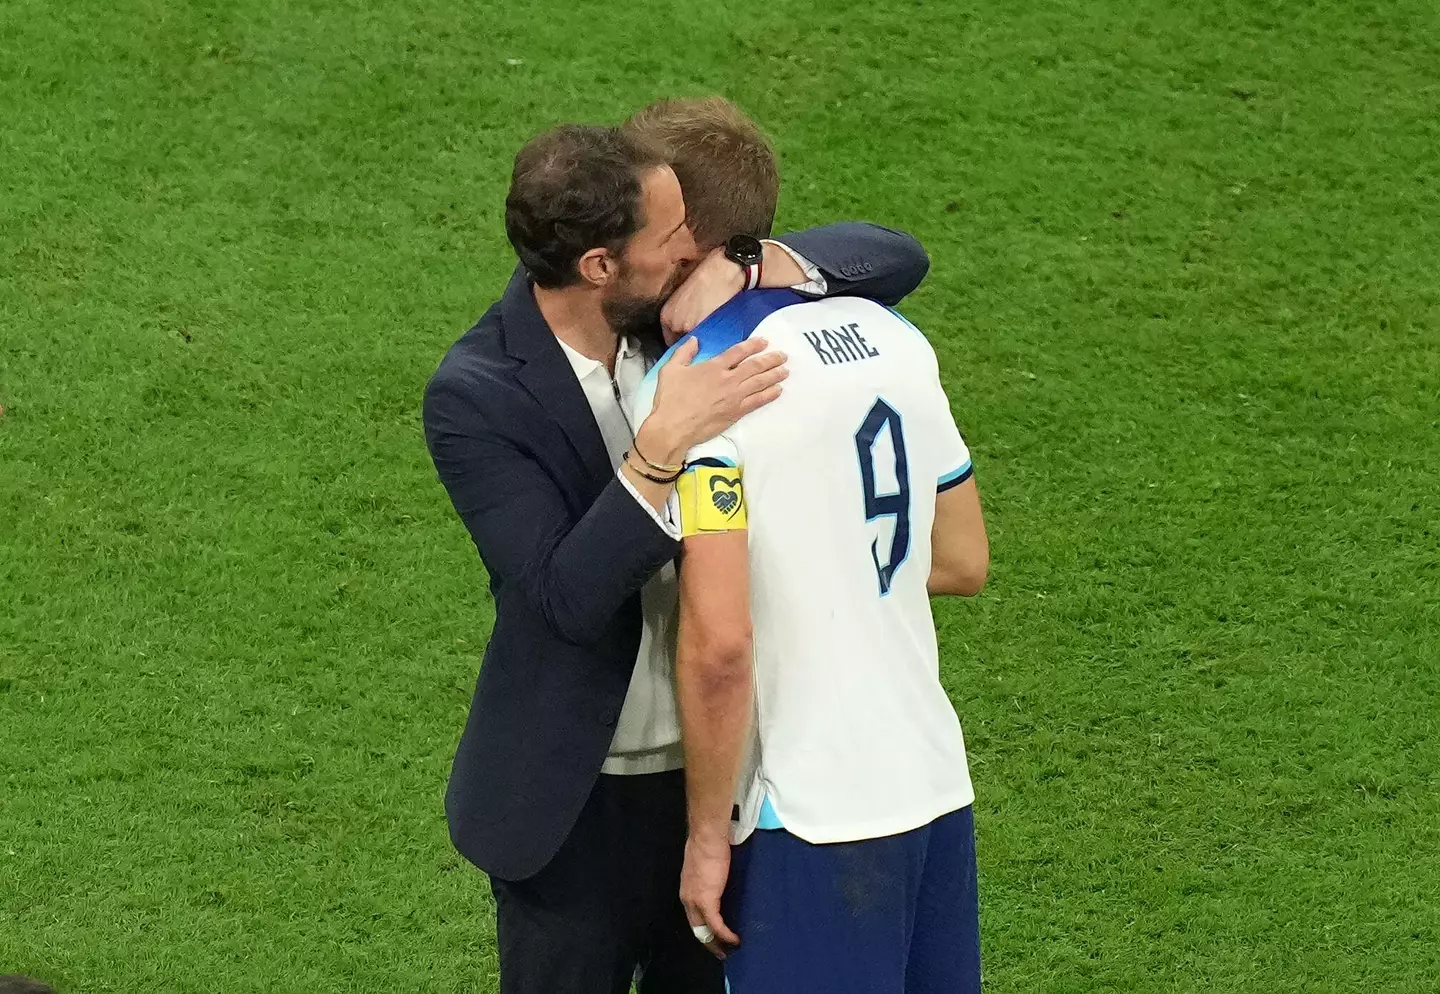 Southgate consoles Harry Kane after his missed penalty. Image: Alamy